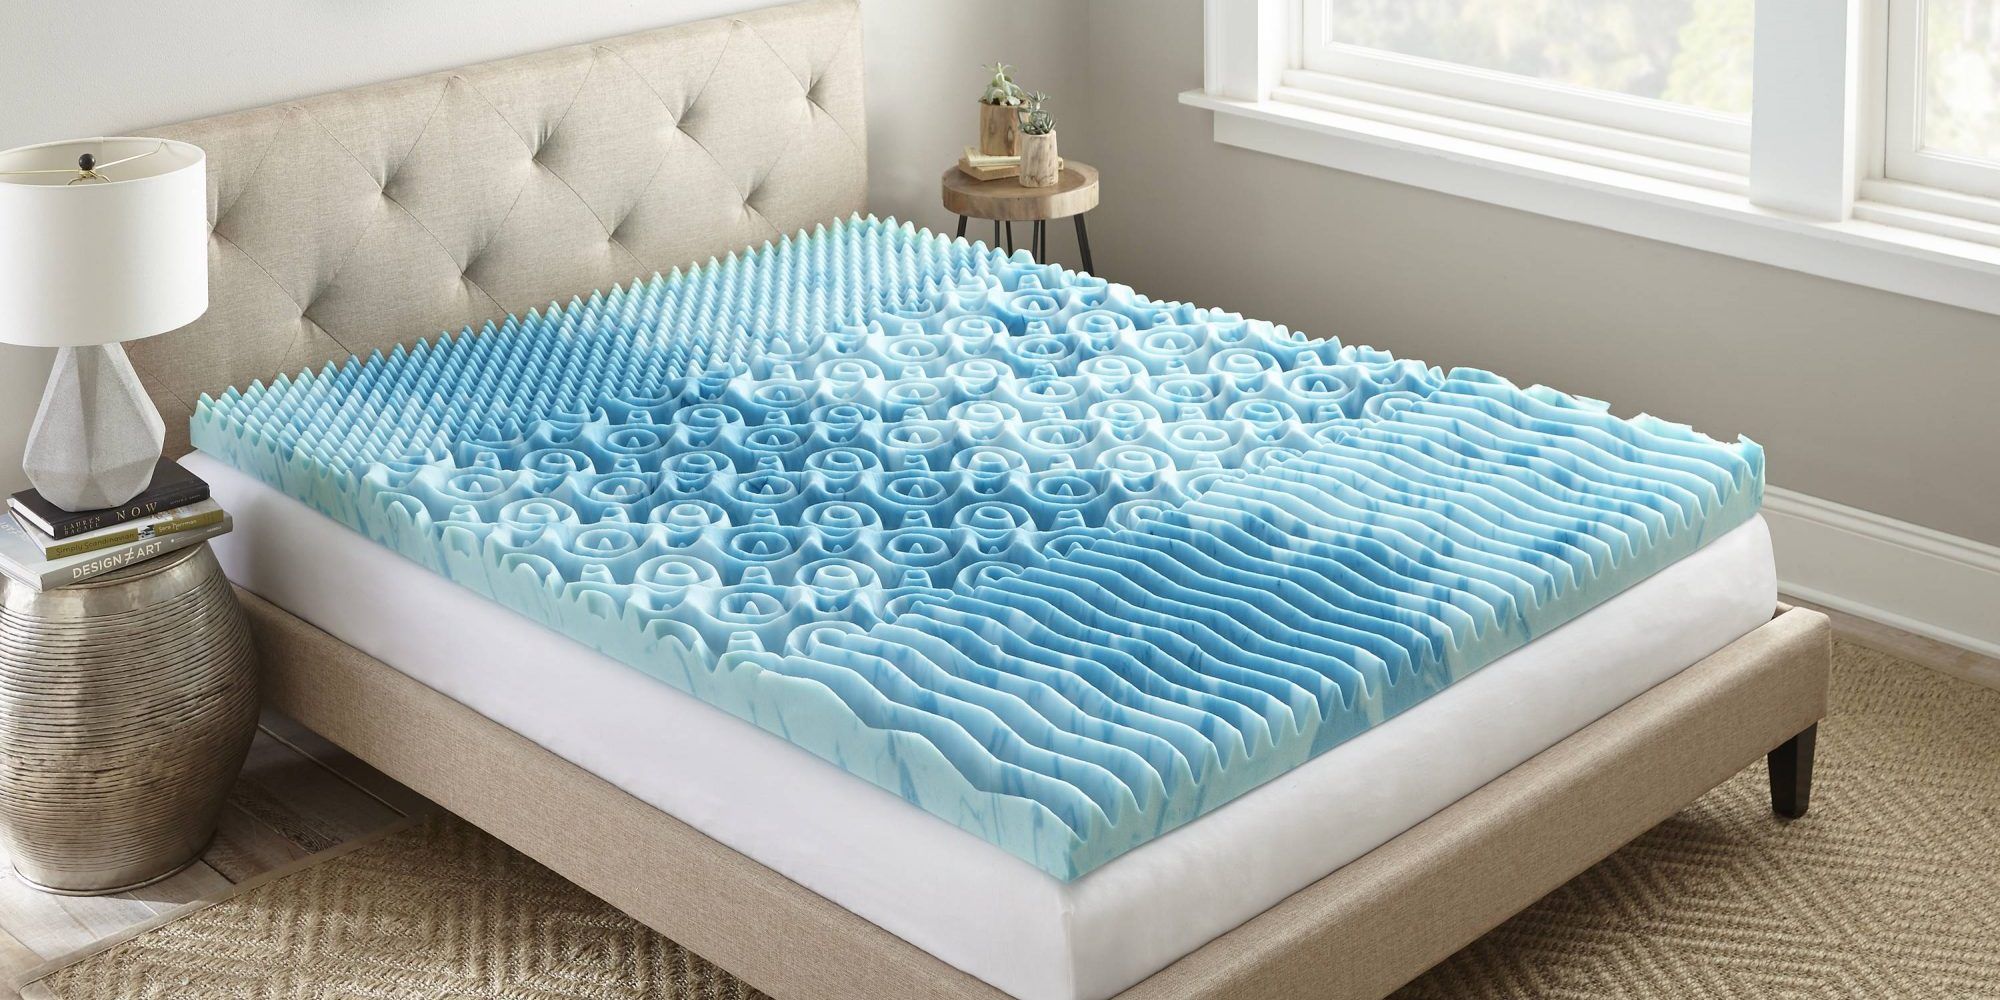 will a mattress topper help with back pain